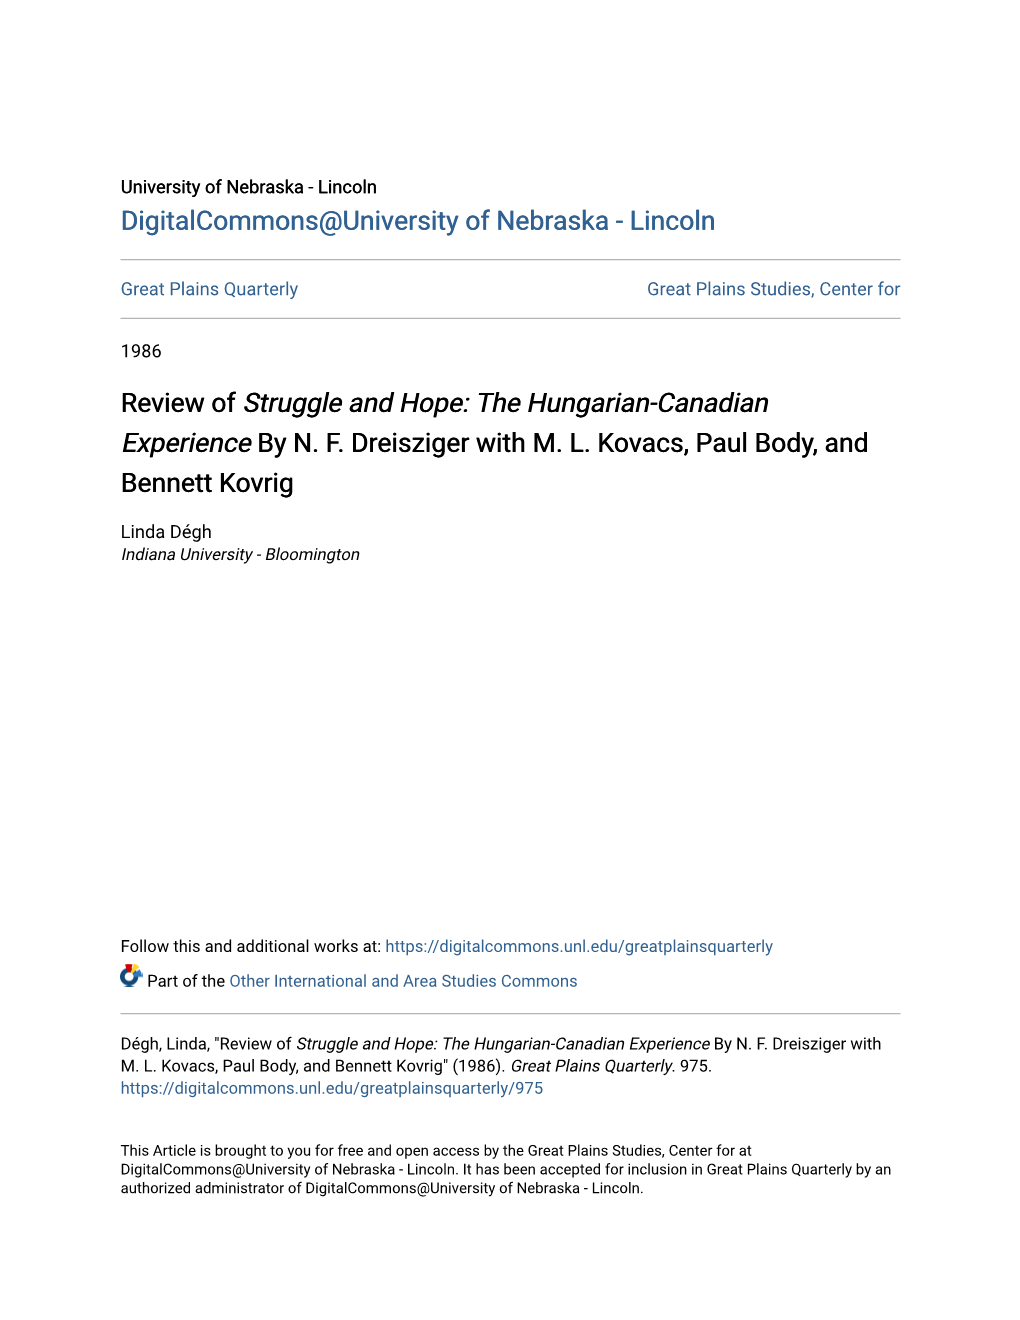 The Hungarian-Canadian Experience by NF Dreisziger with ML Kovacs